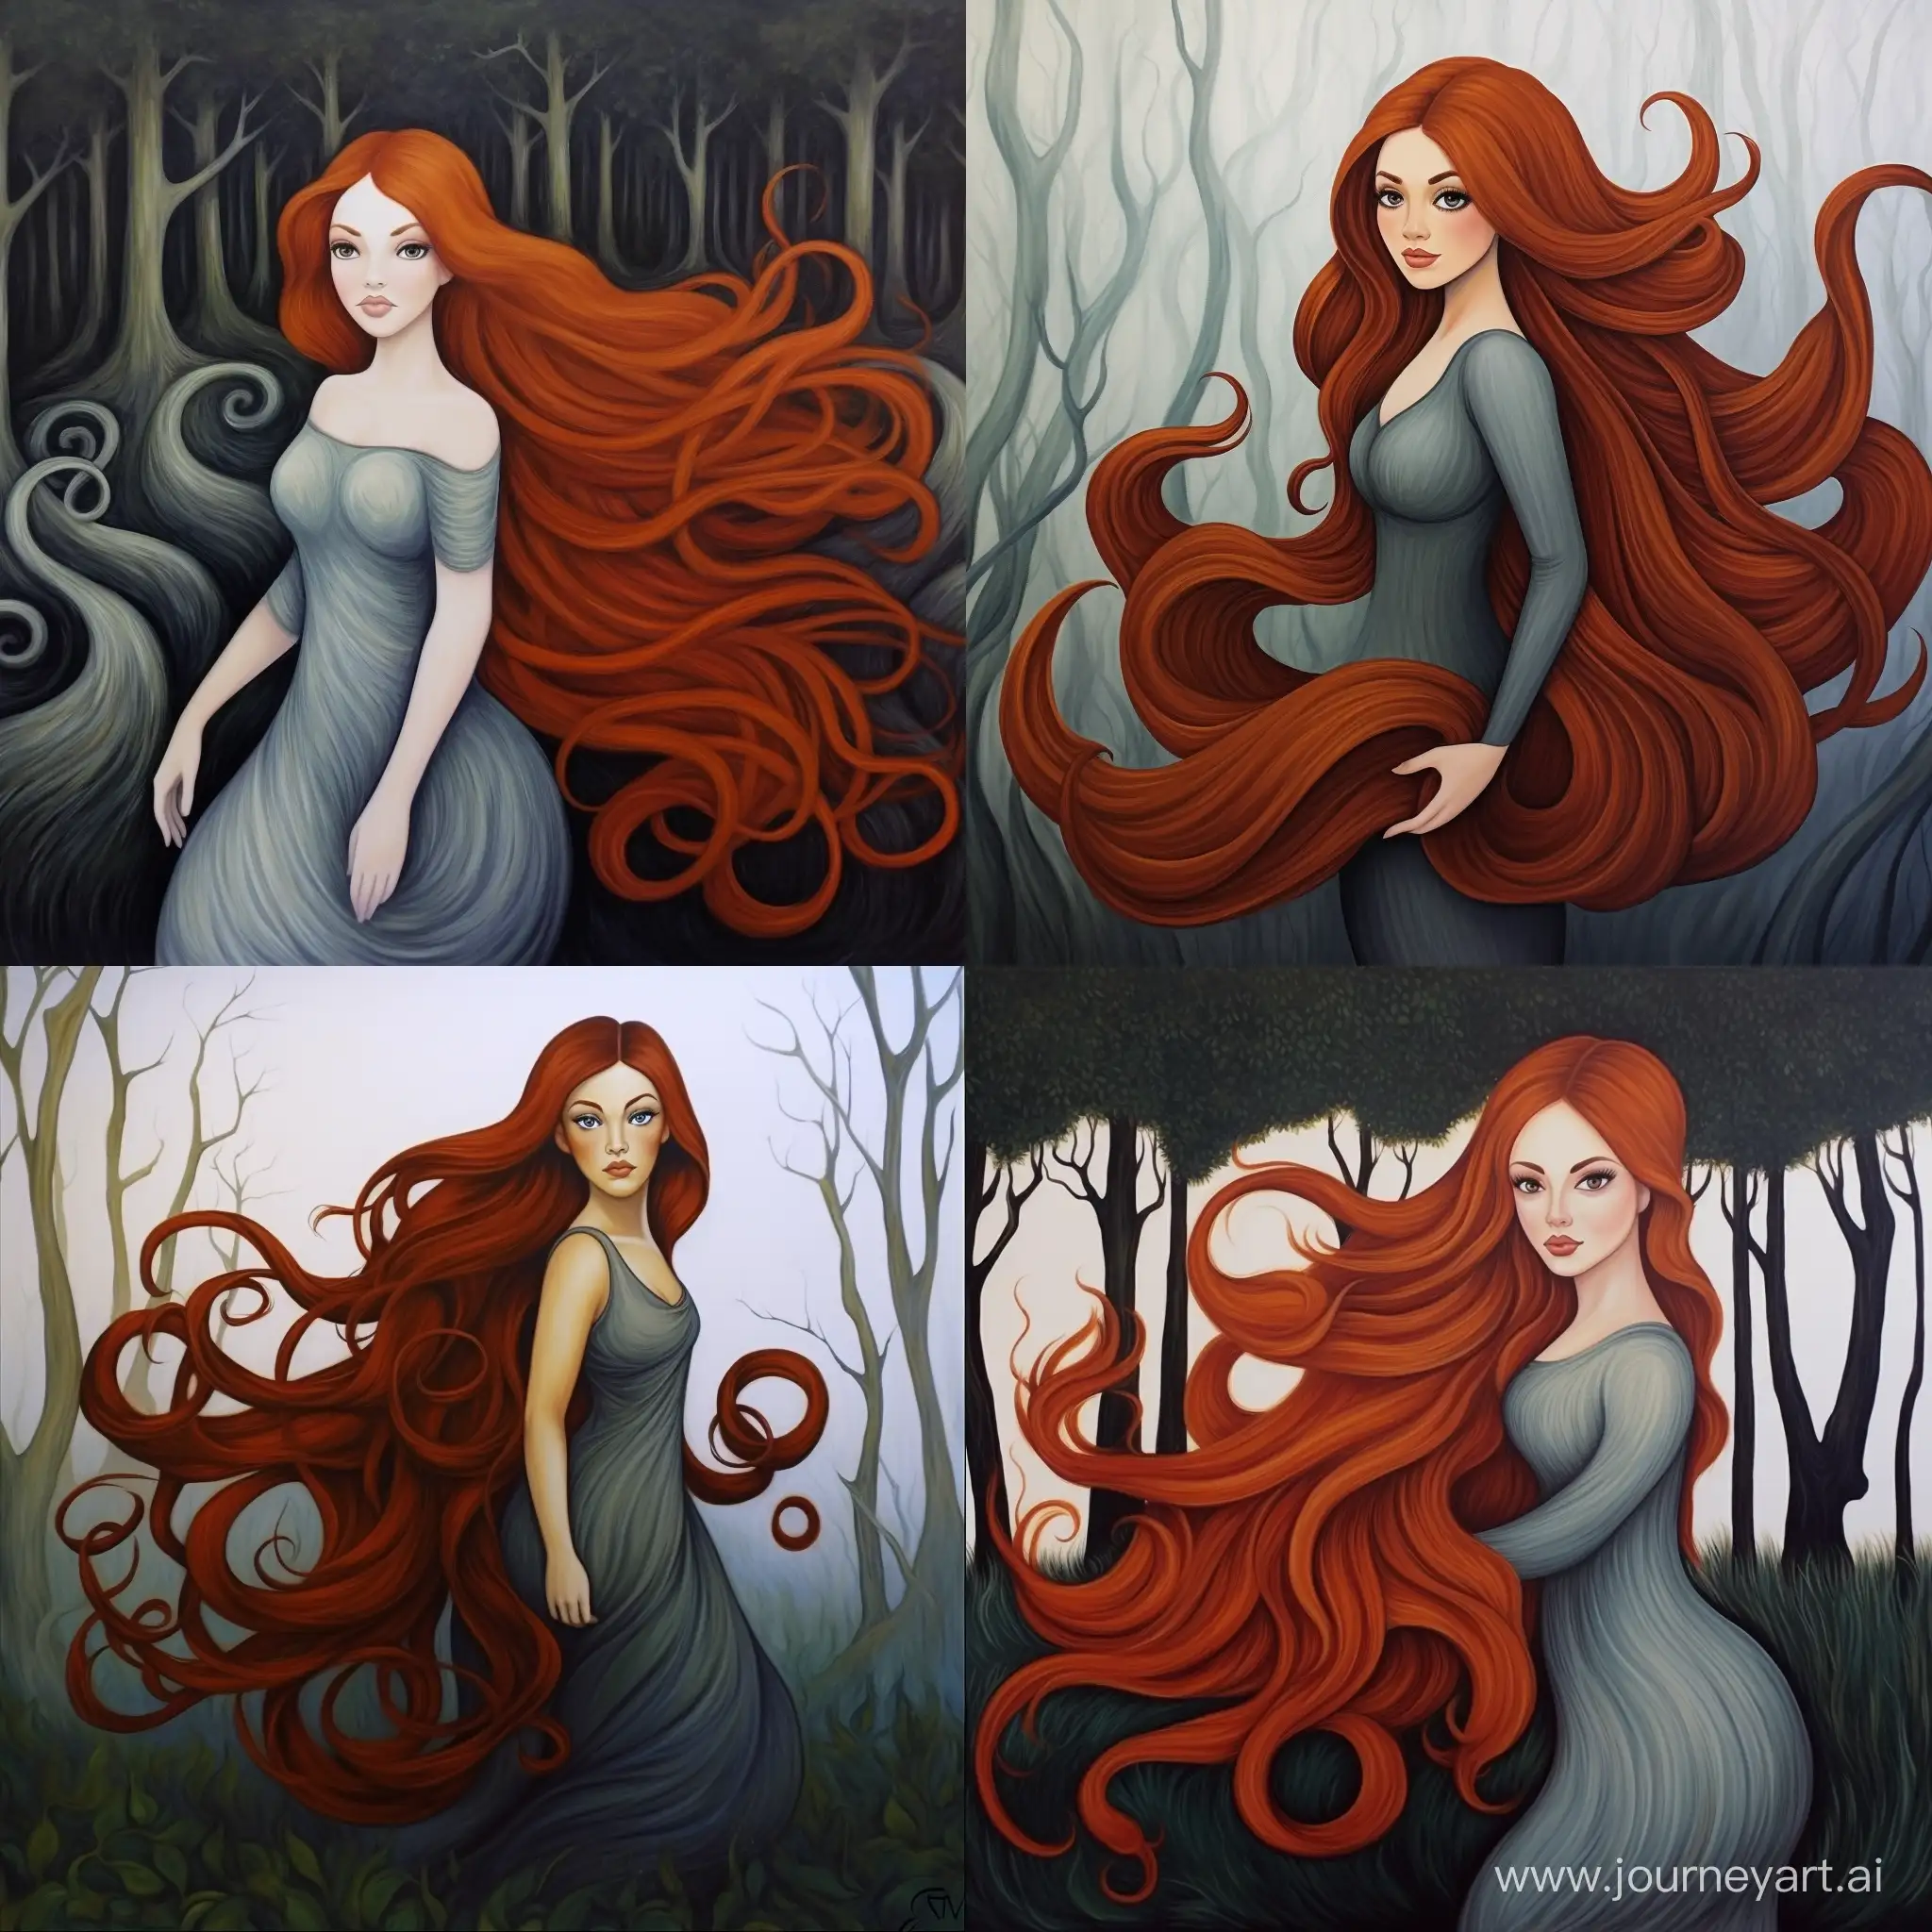 A Curvy Woman with long red hair does yogaga